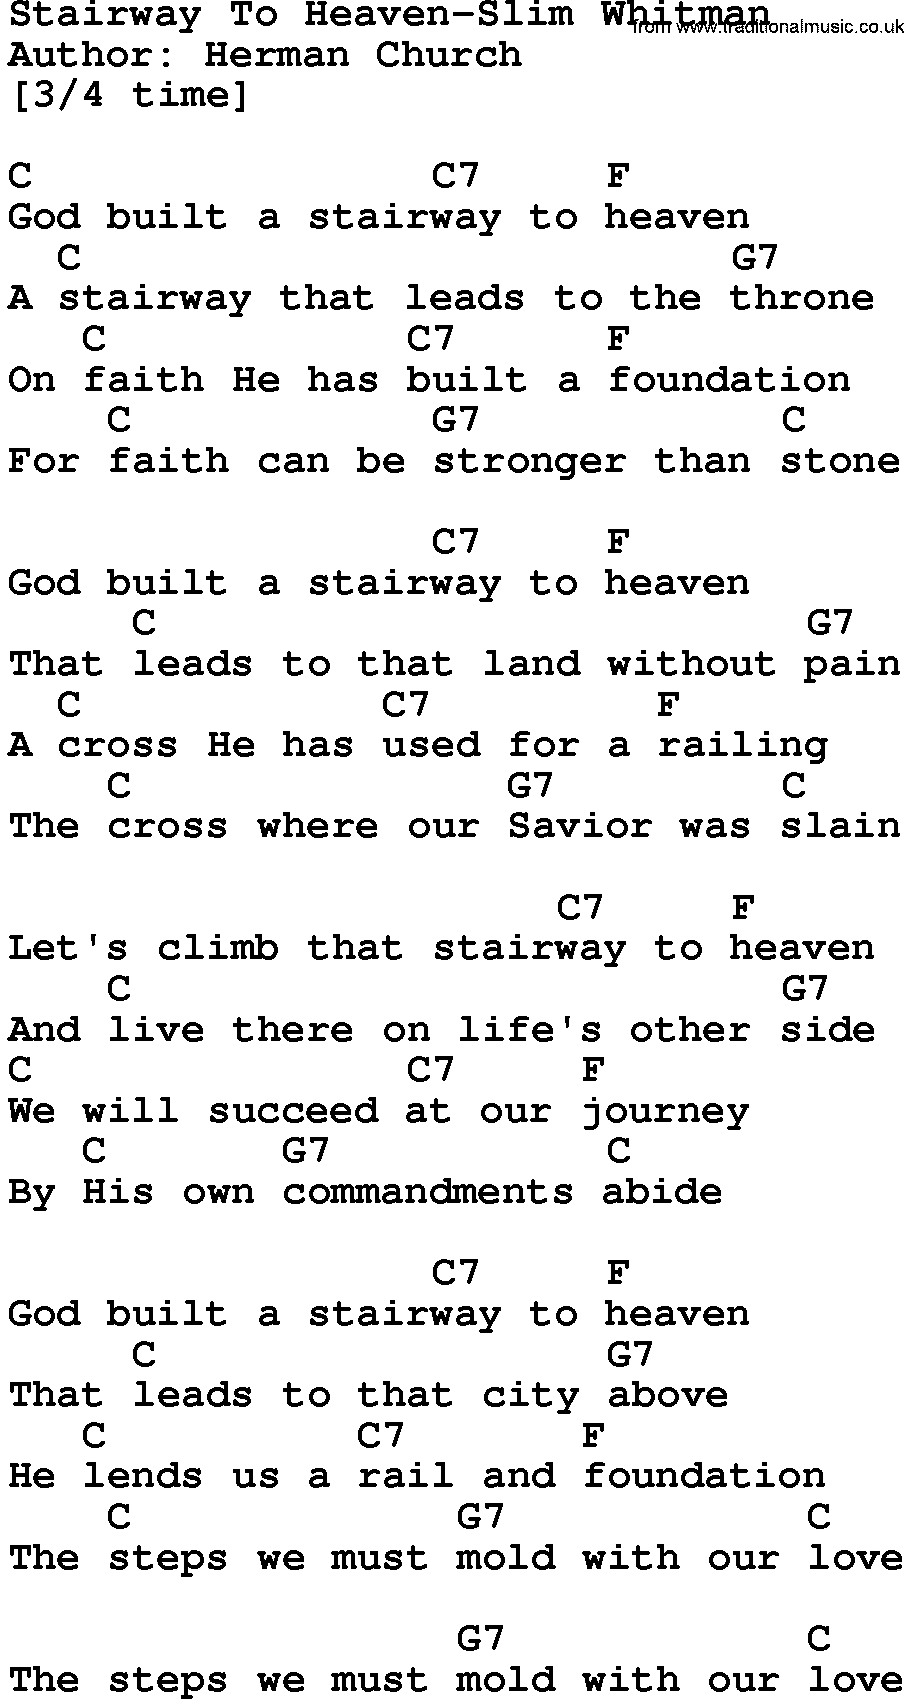 Country music song: Stairway To Heaven-Slim Whitman lyrics and chords